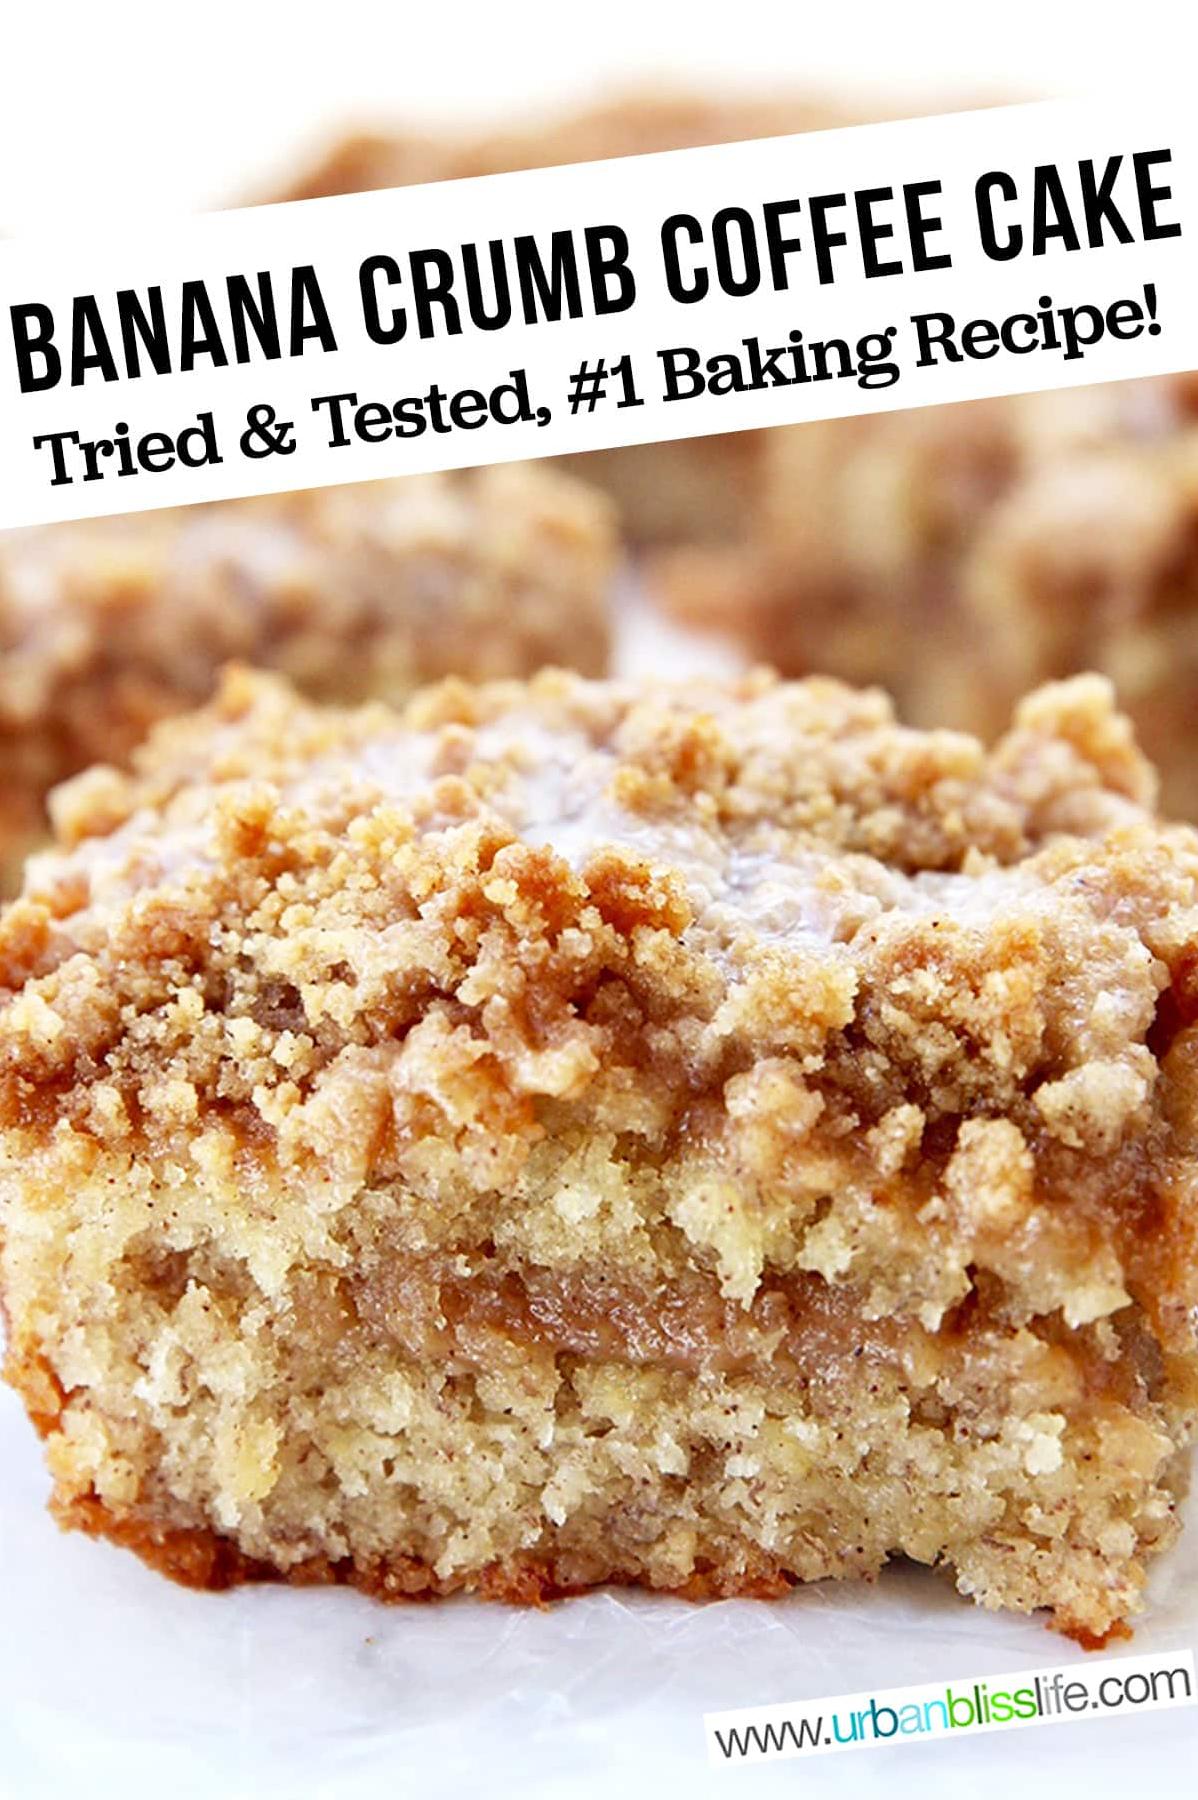  Satisfy your sweet tooth with these brown sugar and banana coffee cakes